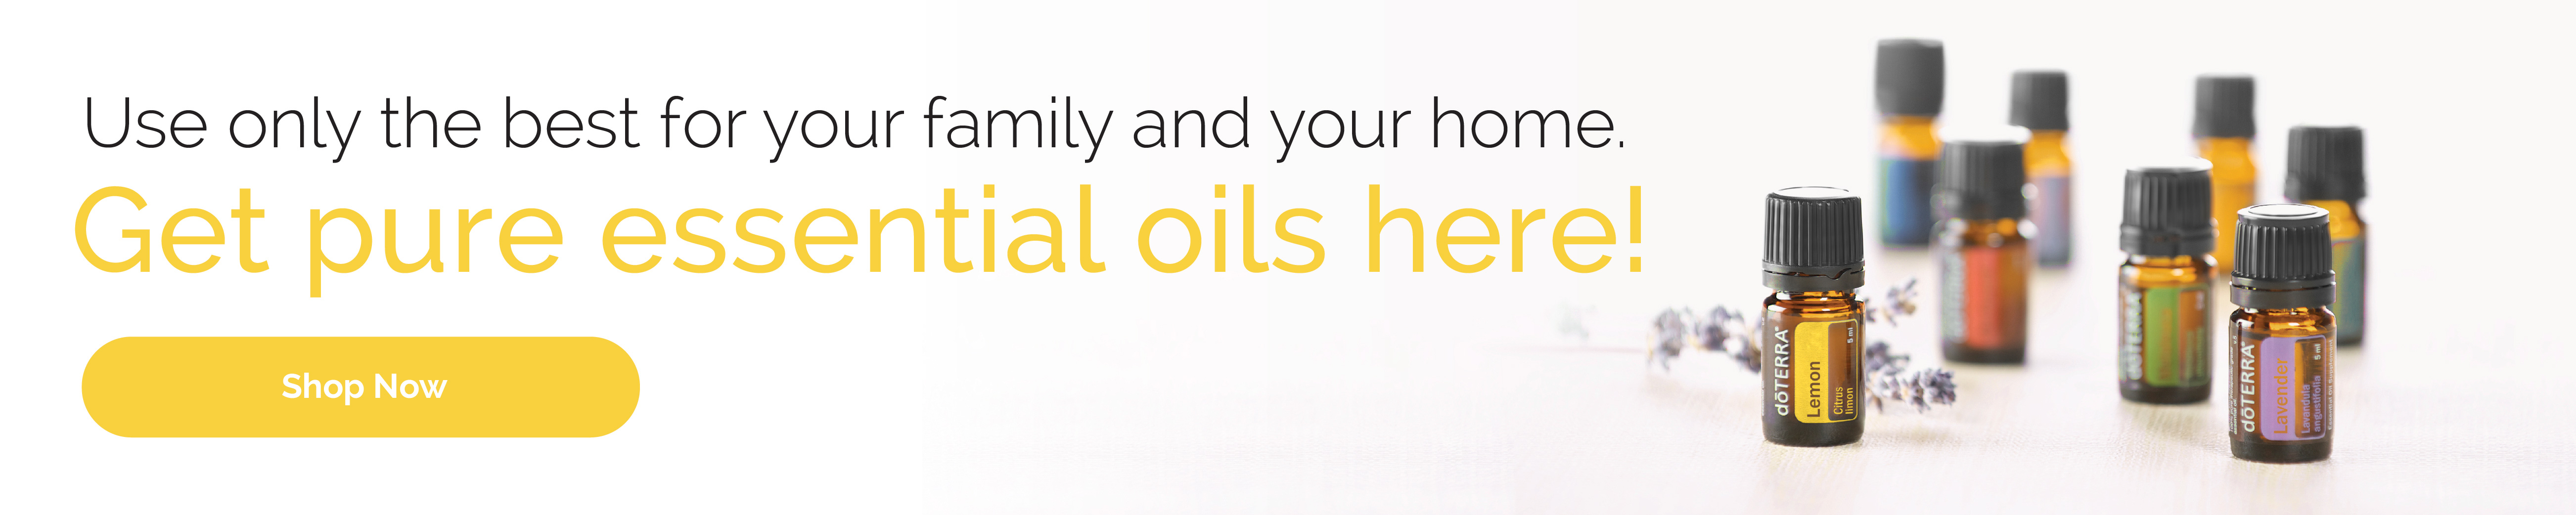 Use only the best for your family and your home. Get pure essential oils here!